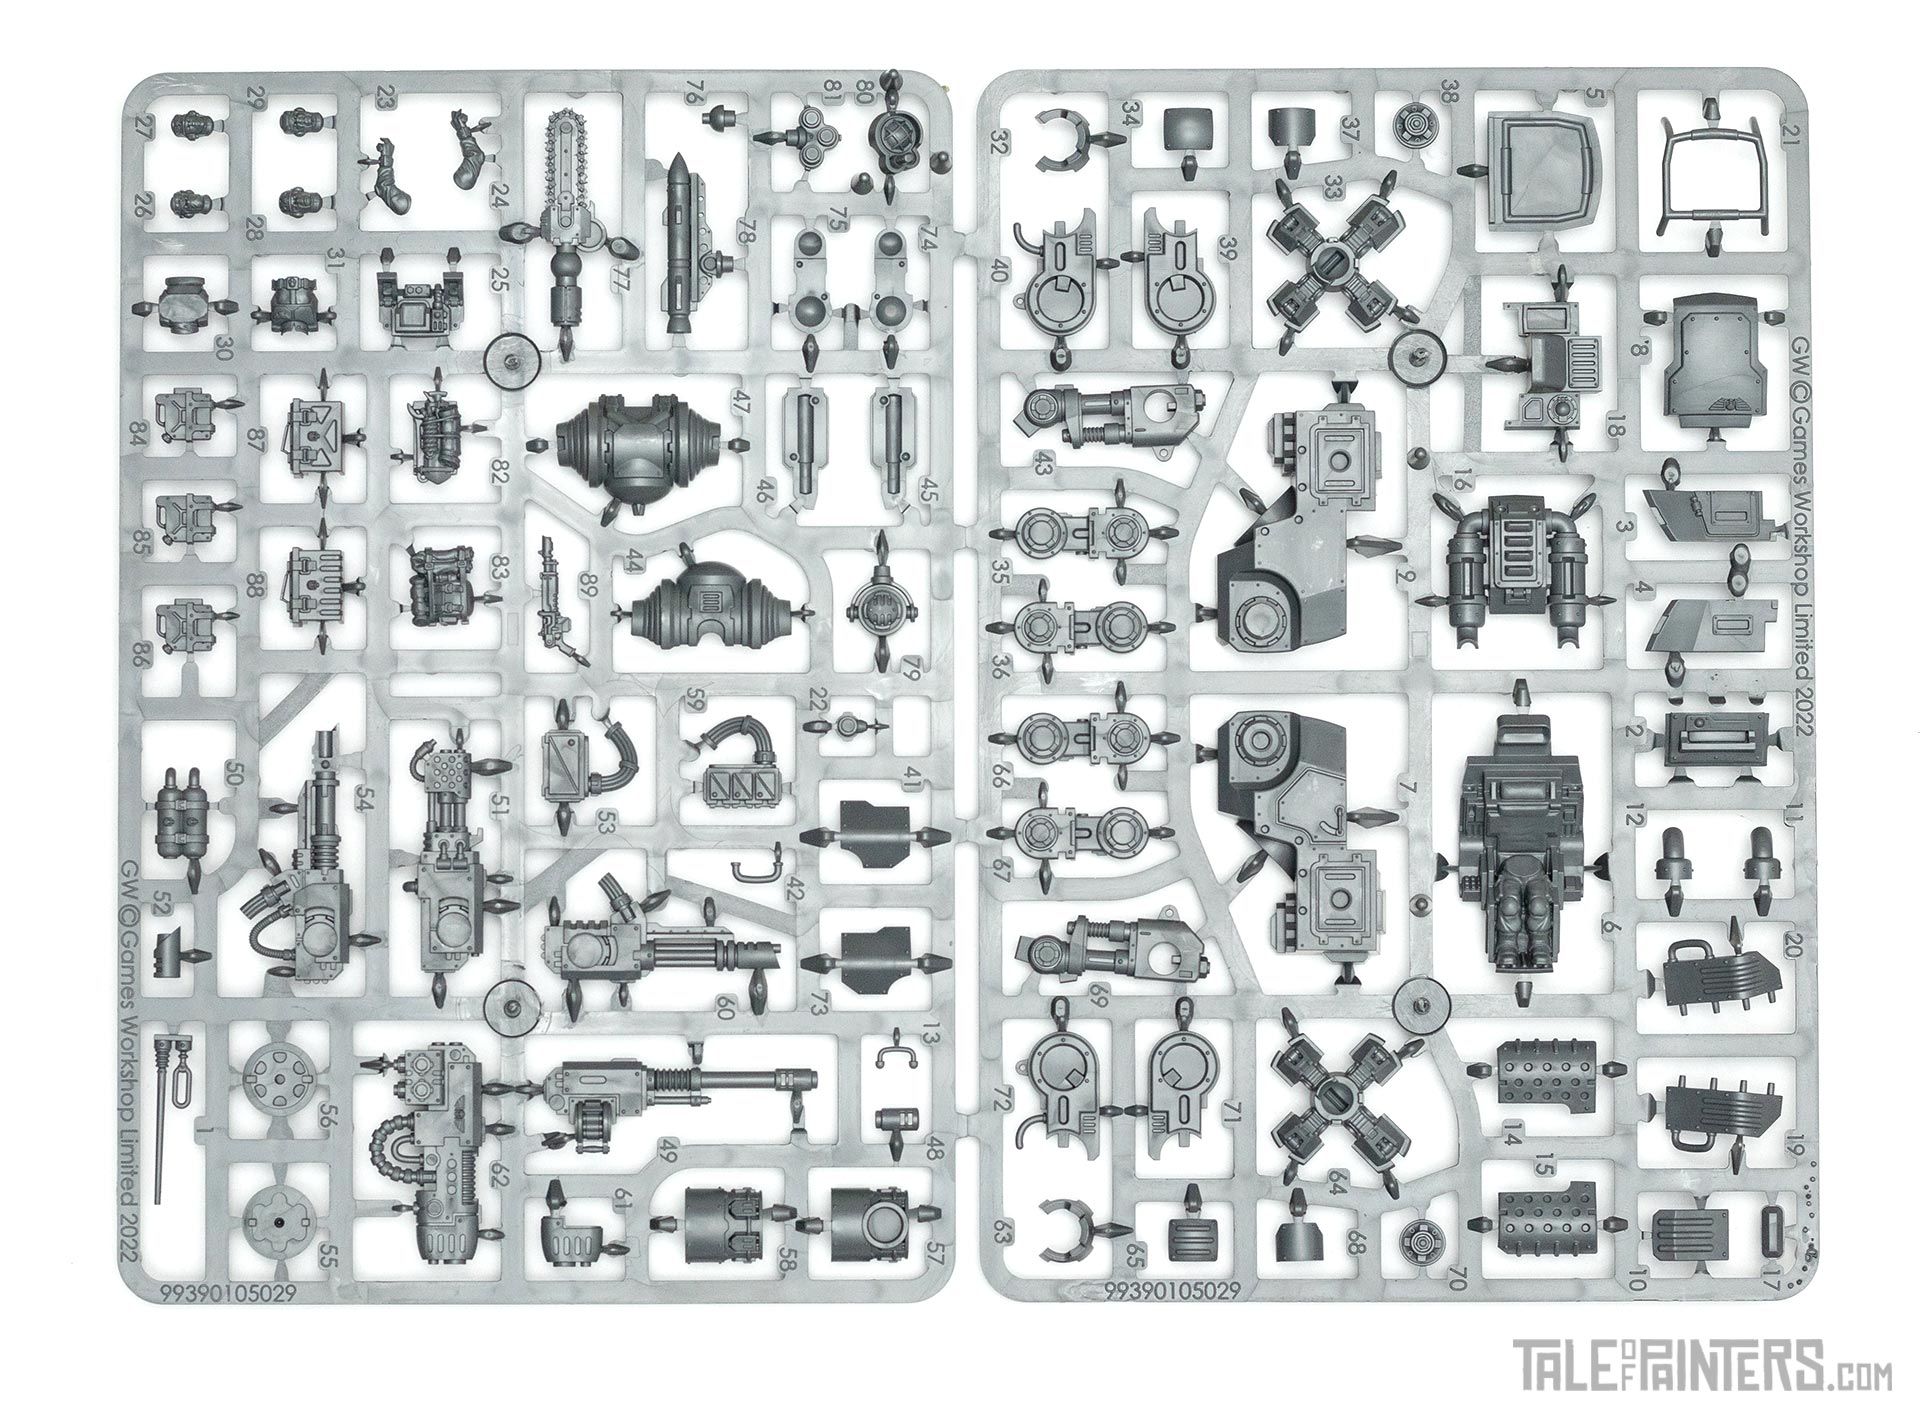 New 2022 Sentinel Sprue from the Astra Militarum Army Set